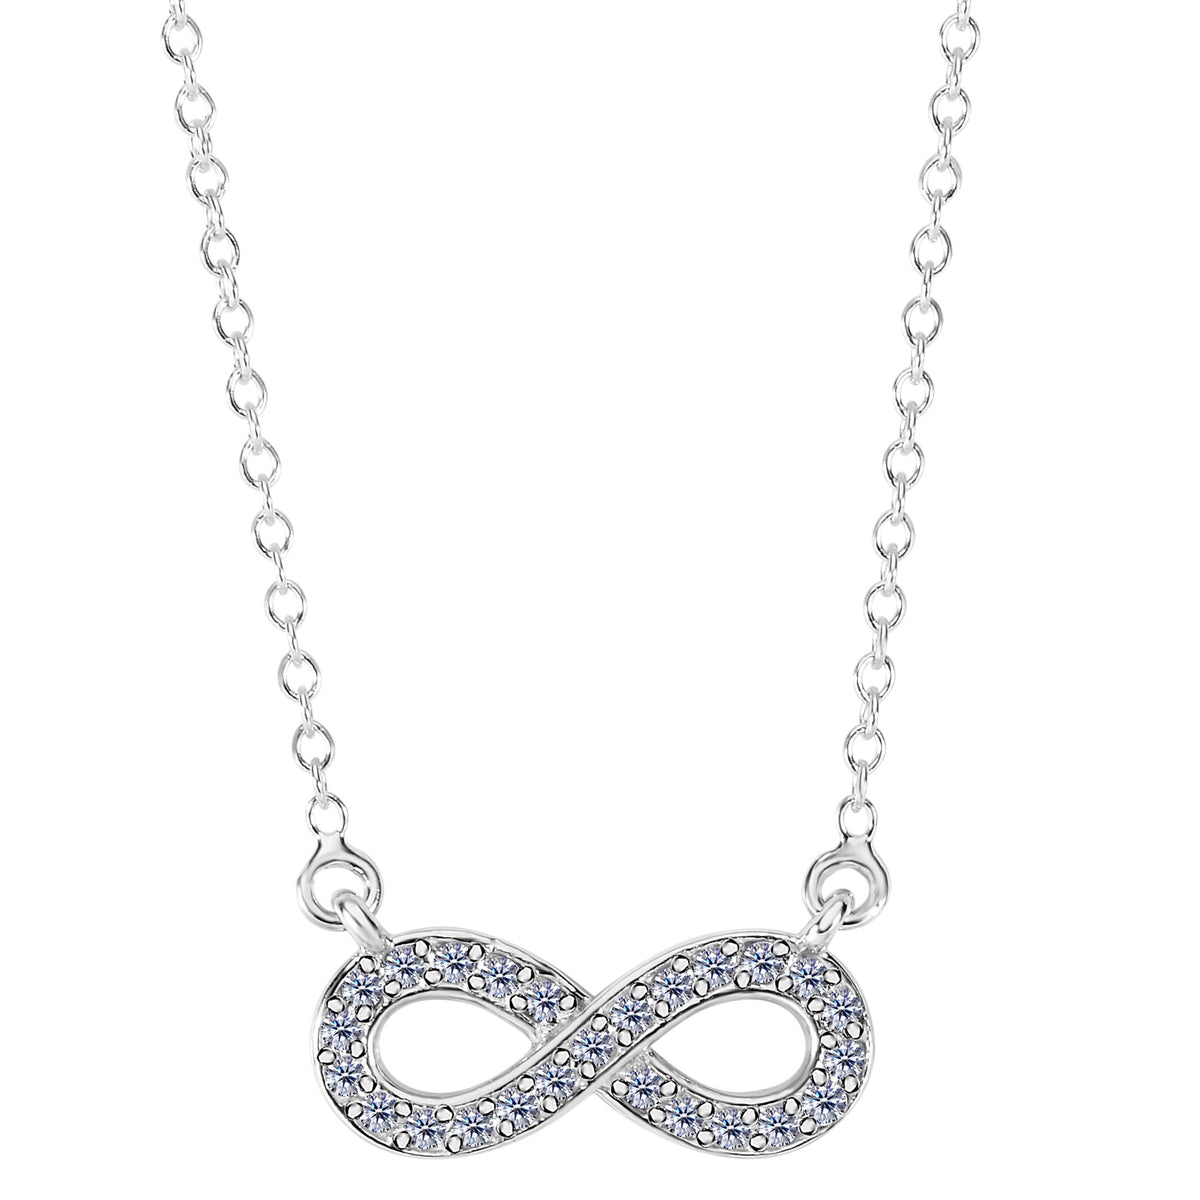 14K White Gold With 0.15 Ct Diamonds Infinity Necklace - 18 Inches fine designer jewelry for men and women